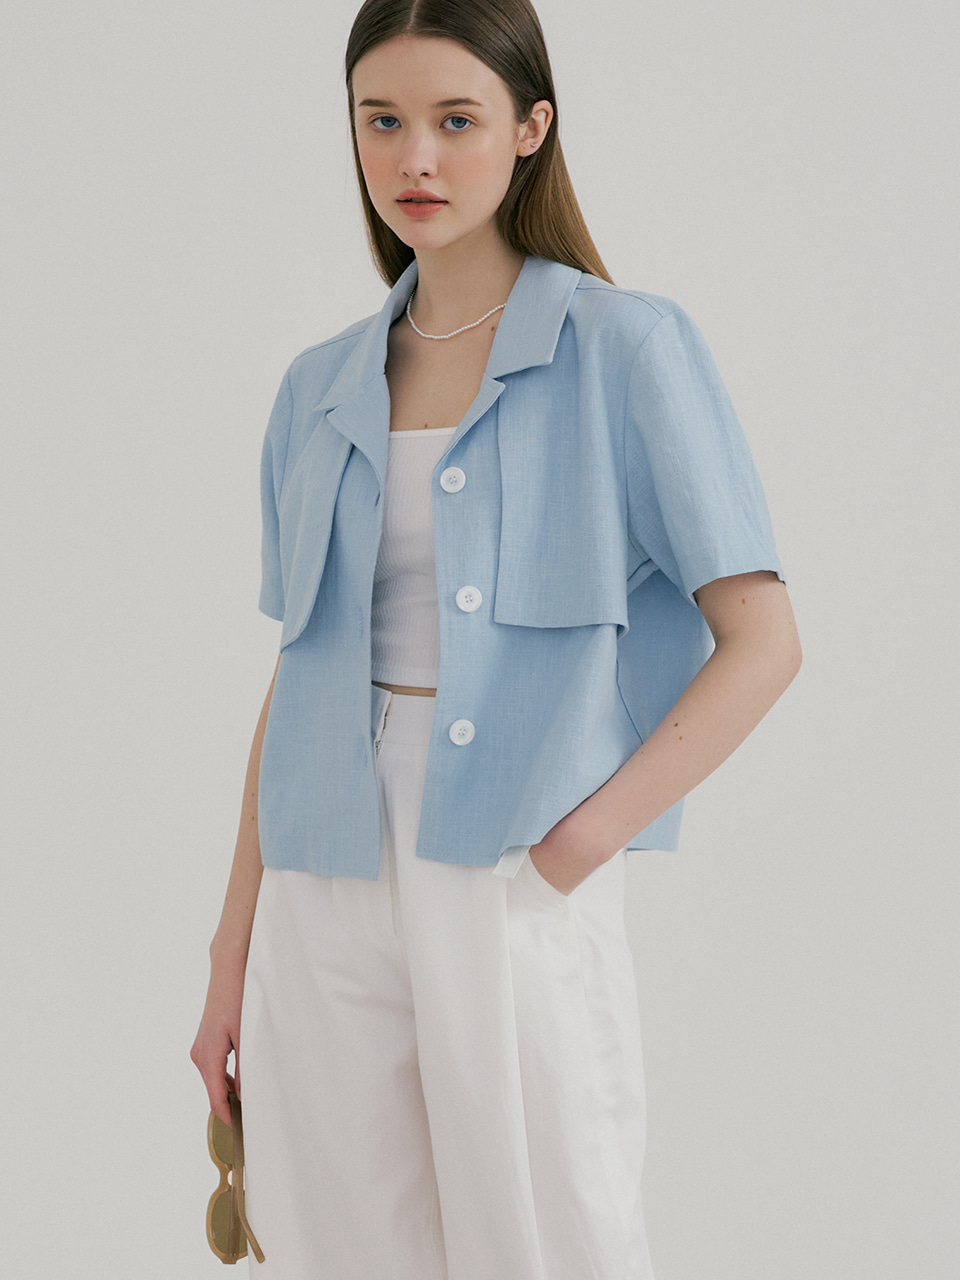 monts 1482 half trench shirt (sky blue)